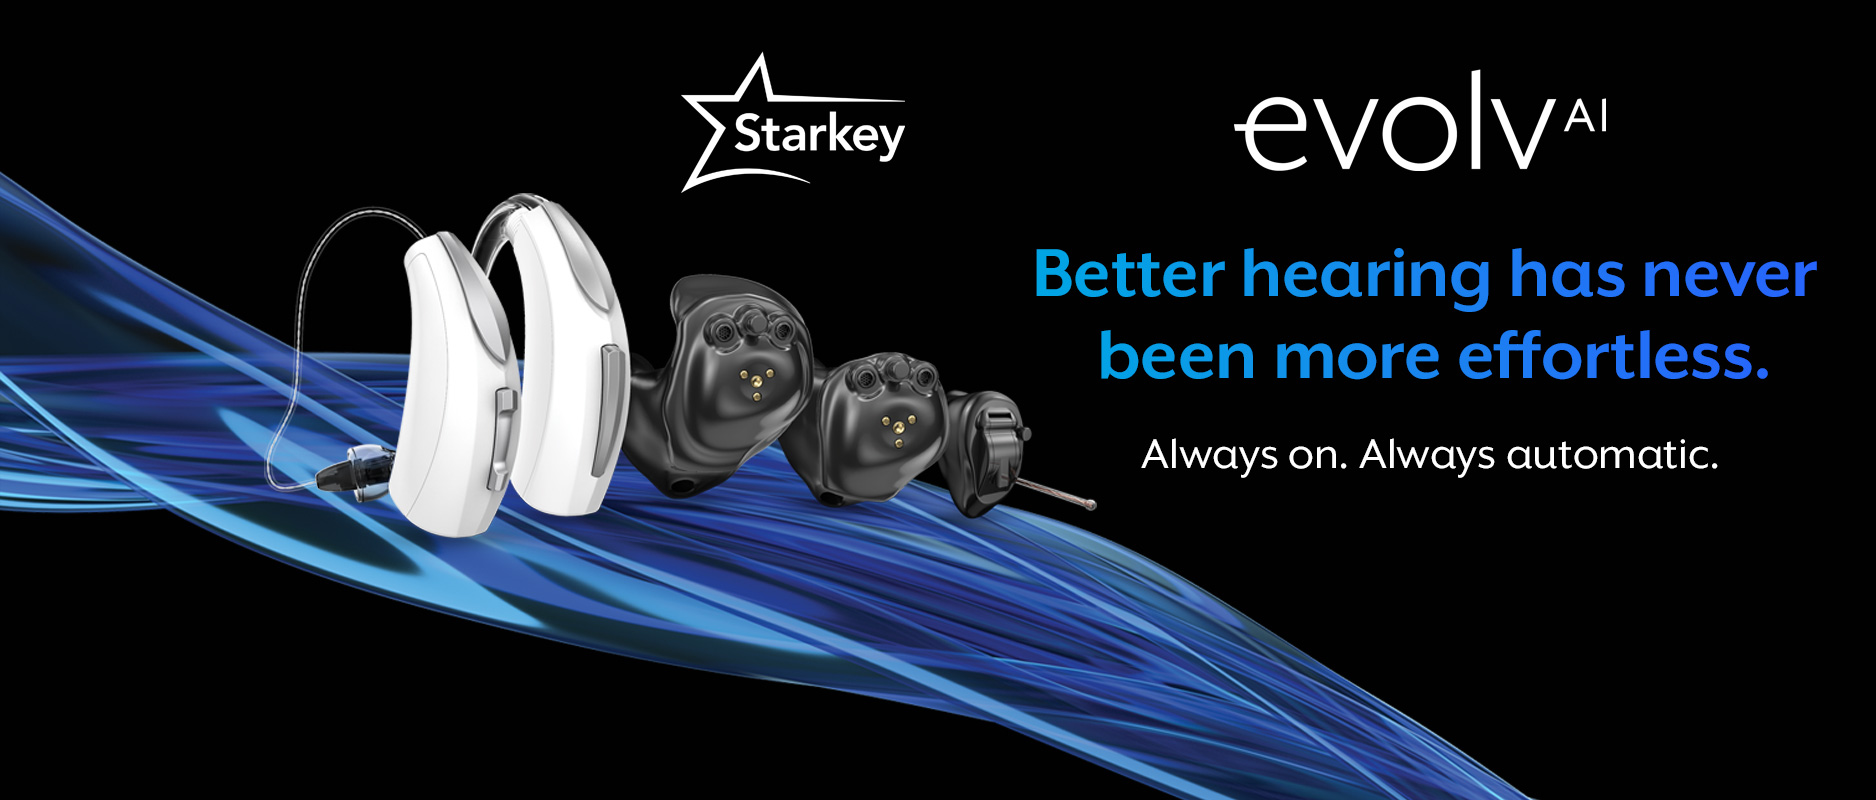 evolve-starkey-better-hearing-aid-ai-effortless-automatic-you-hear